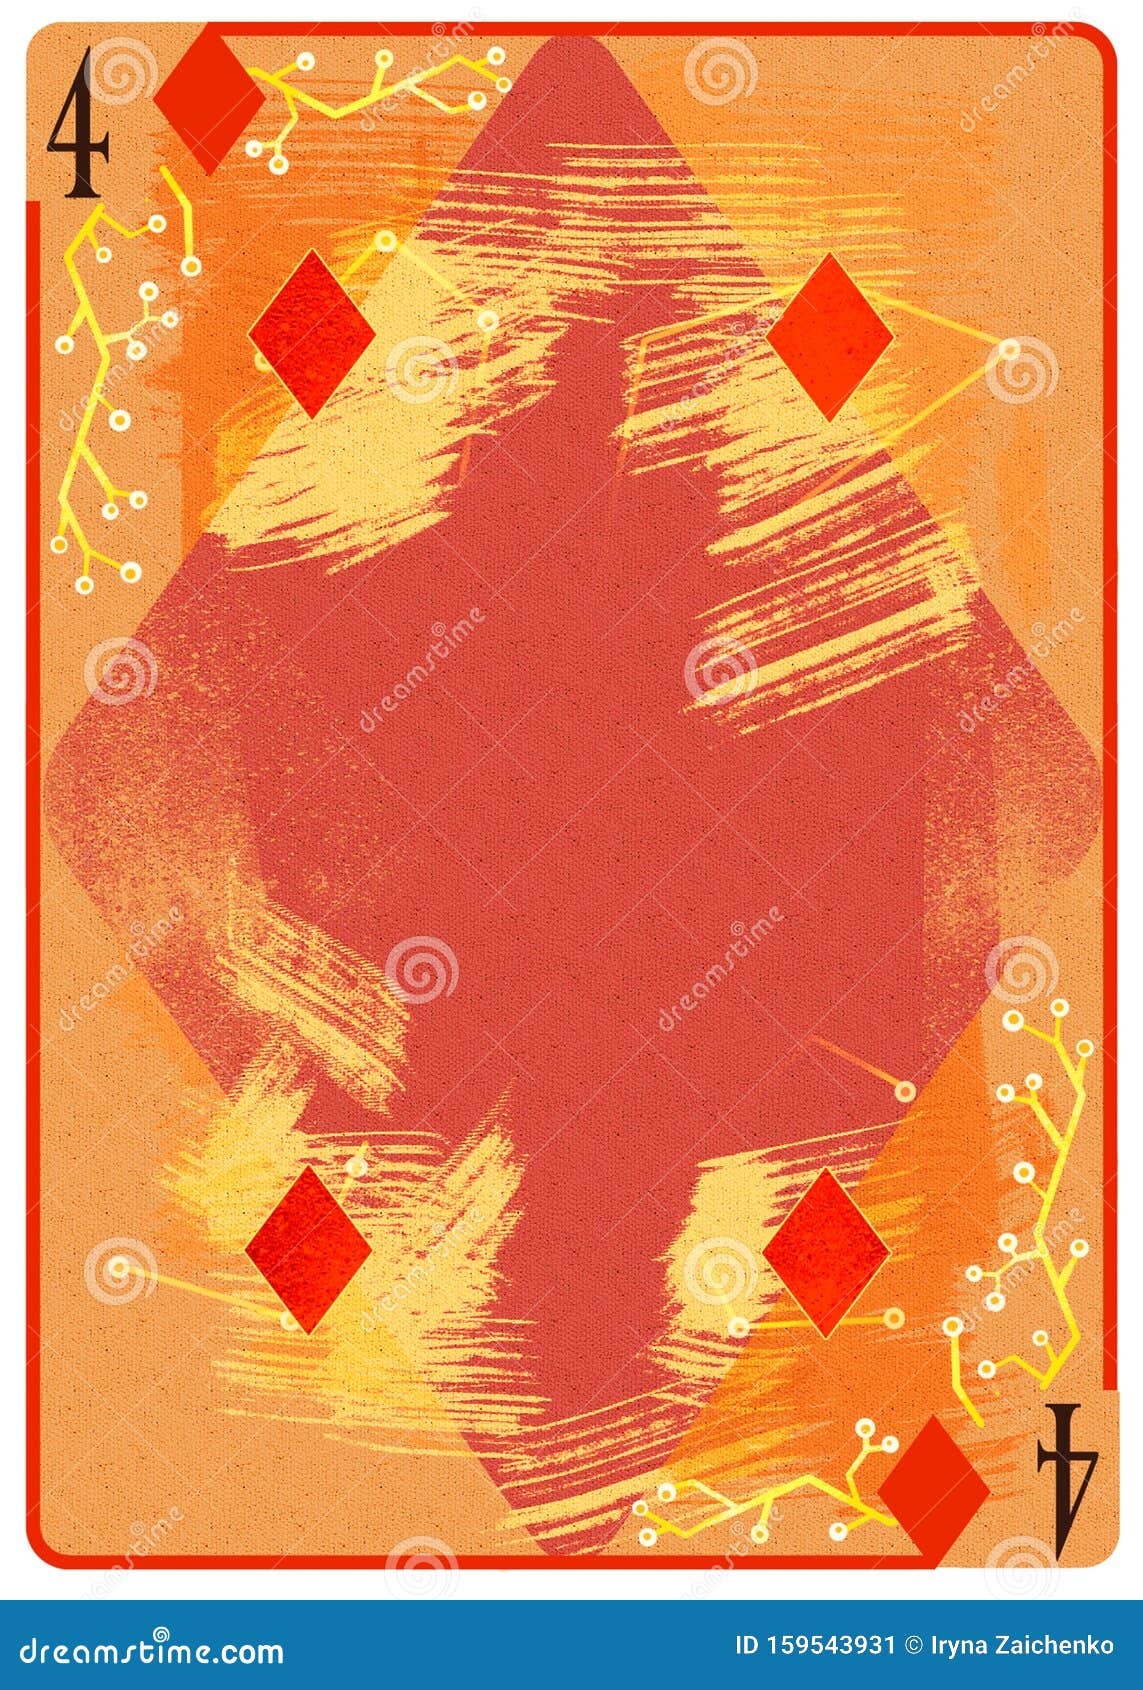 four of diamonds playing card. unique hand drawn pocker card. one of 52 cards in french card deck, english or anglo-american